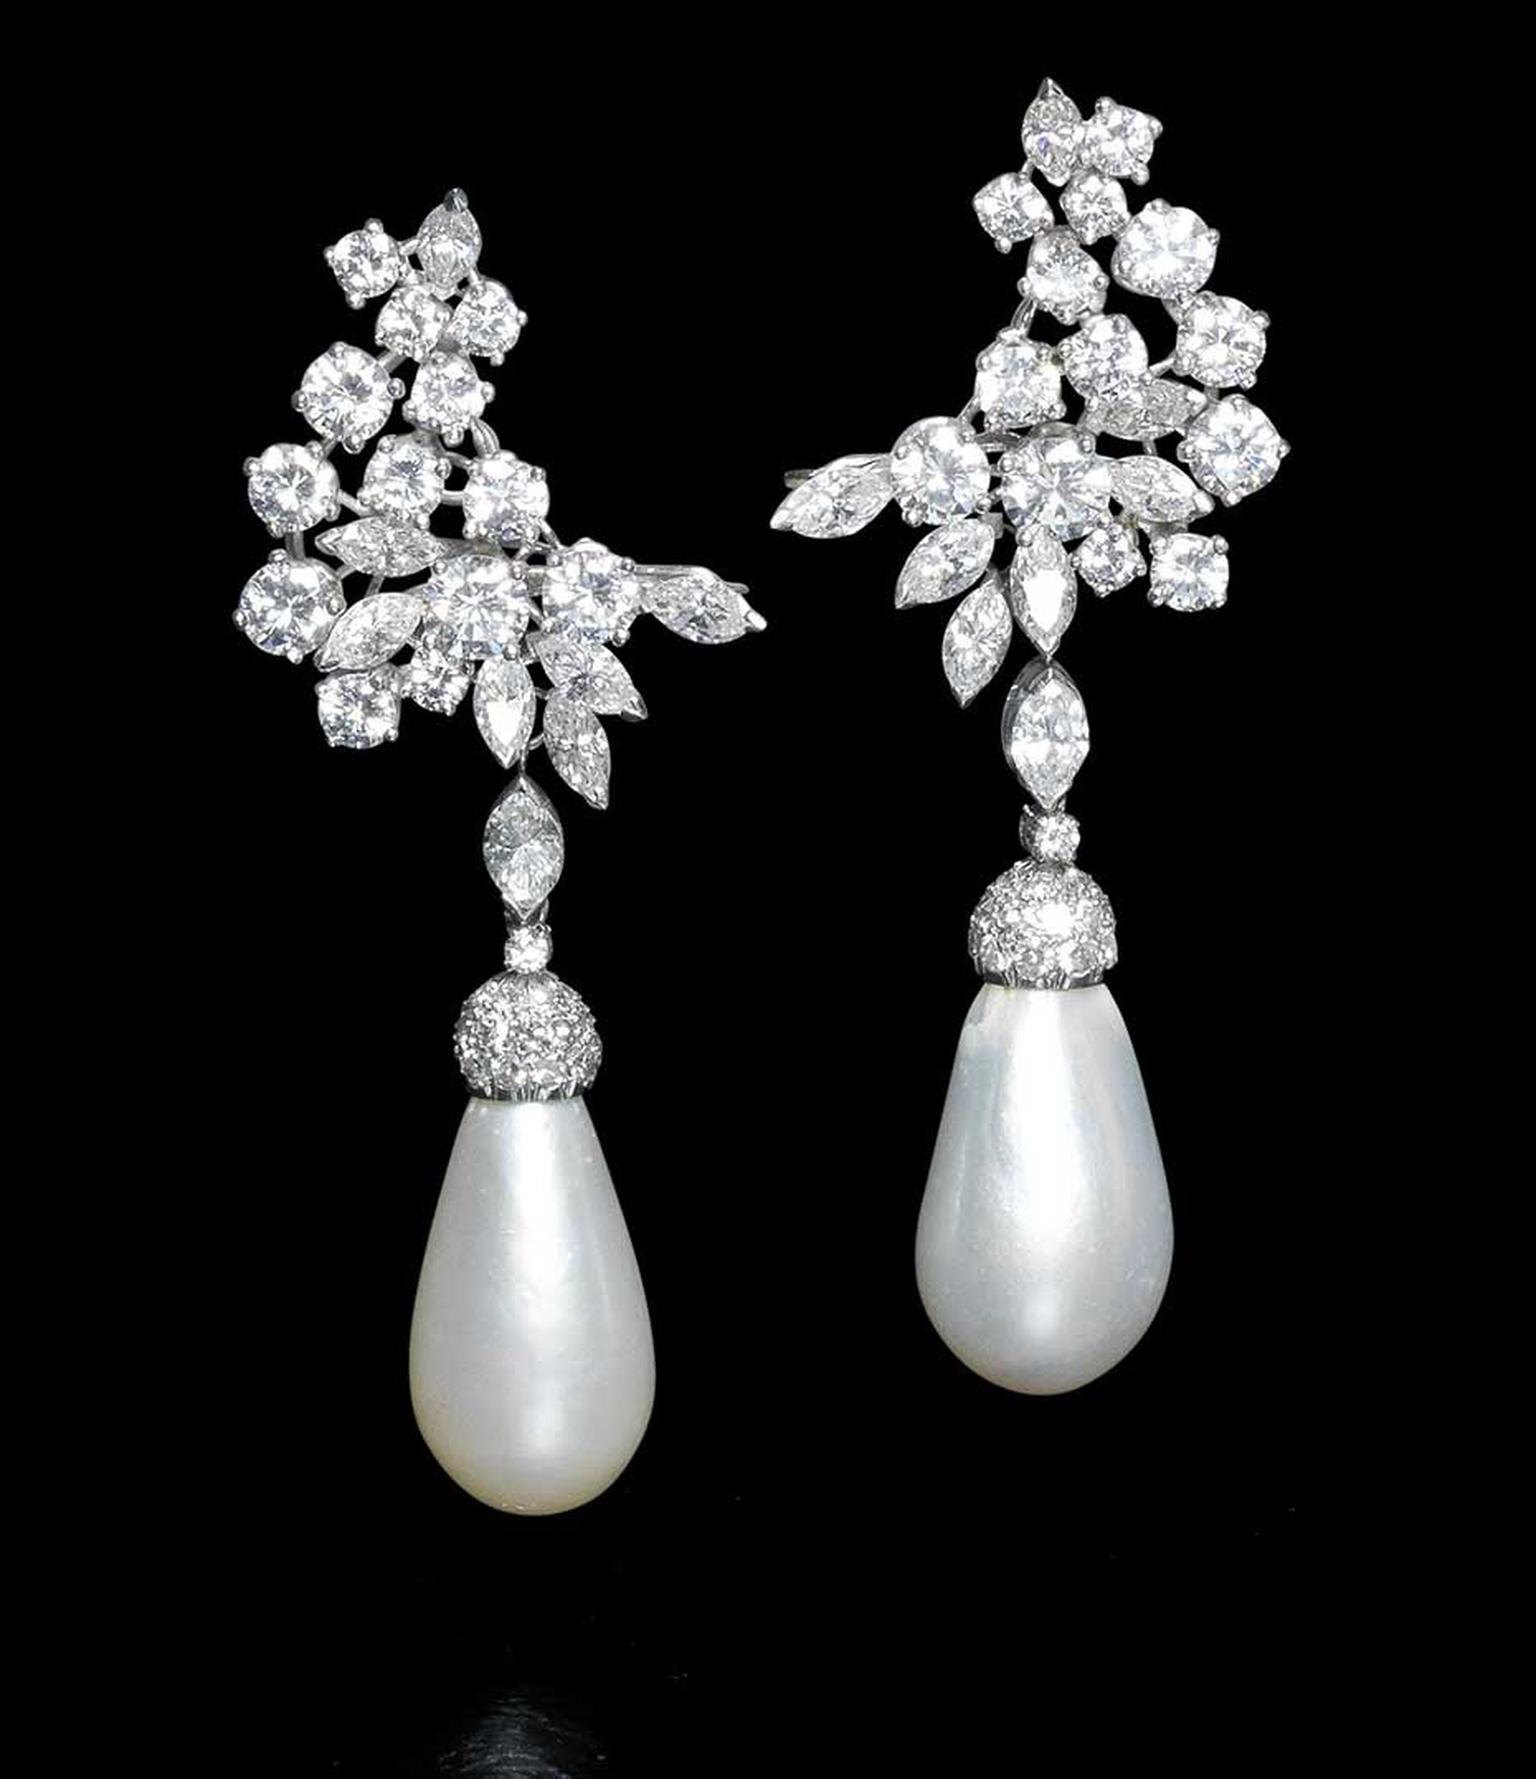 This pair of natural pearl and diamond earrings sold for £290,500 at Bonhams London in April 2014 – double their estimate.